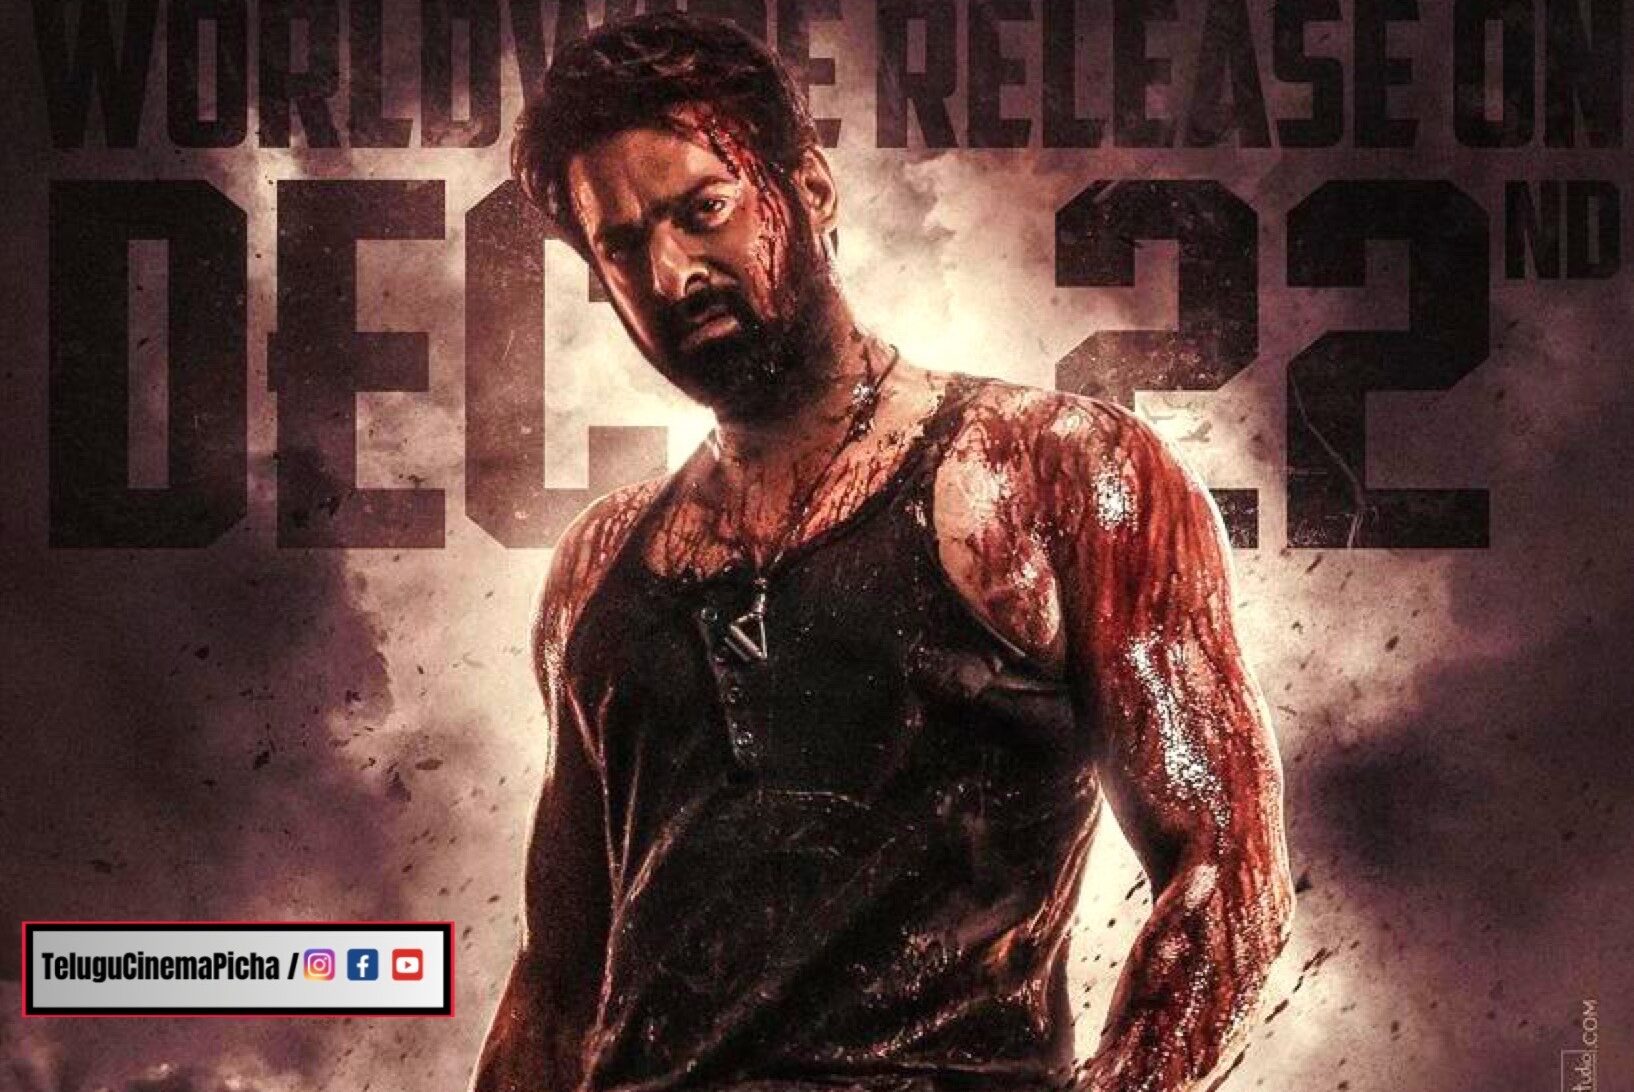 Salaar Movie: Prabhas Takes Center Stage in This Action-Packed Thriller Releasing on December 22nd